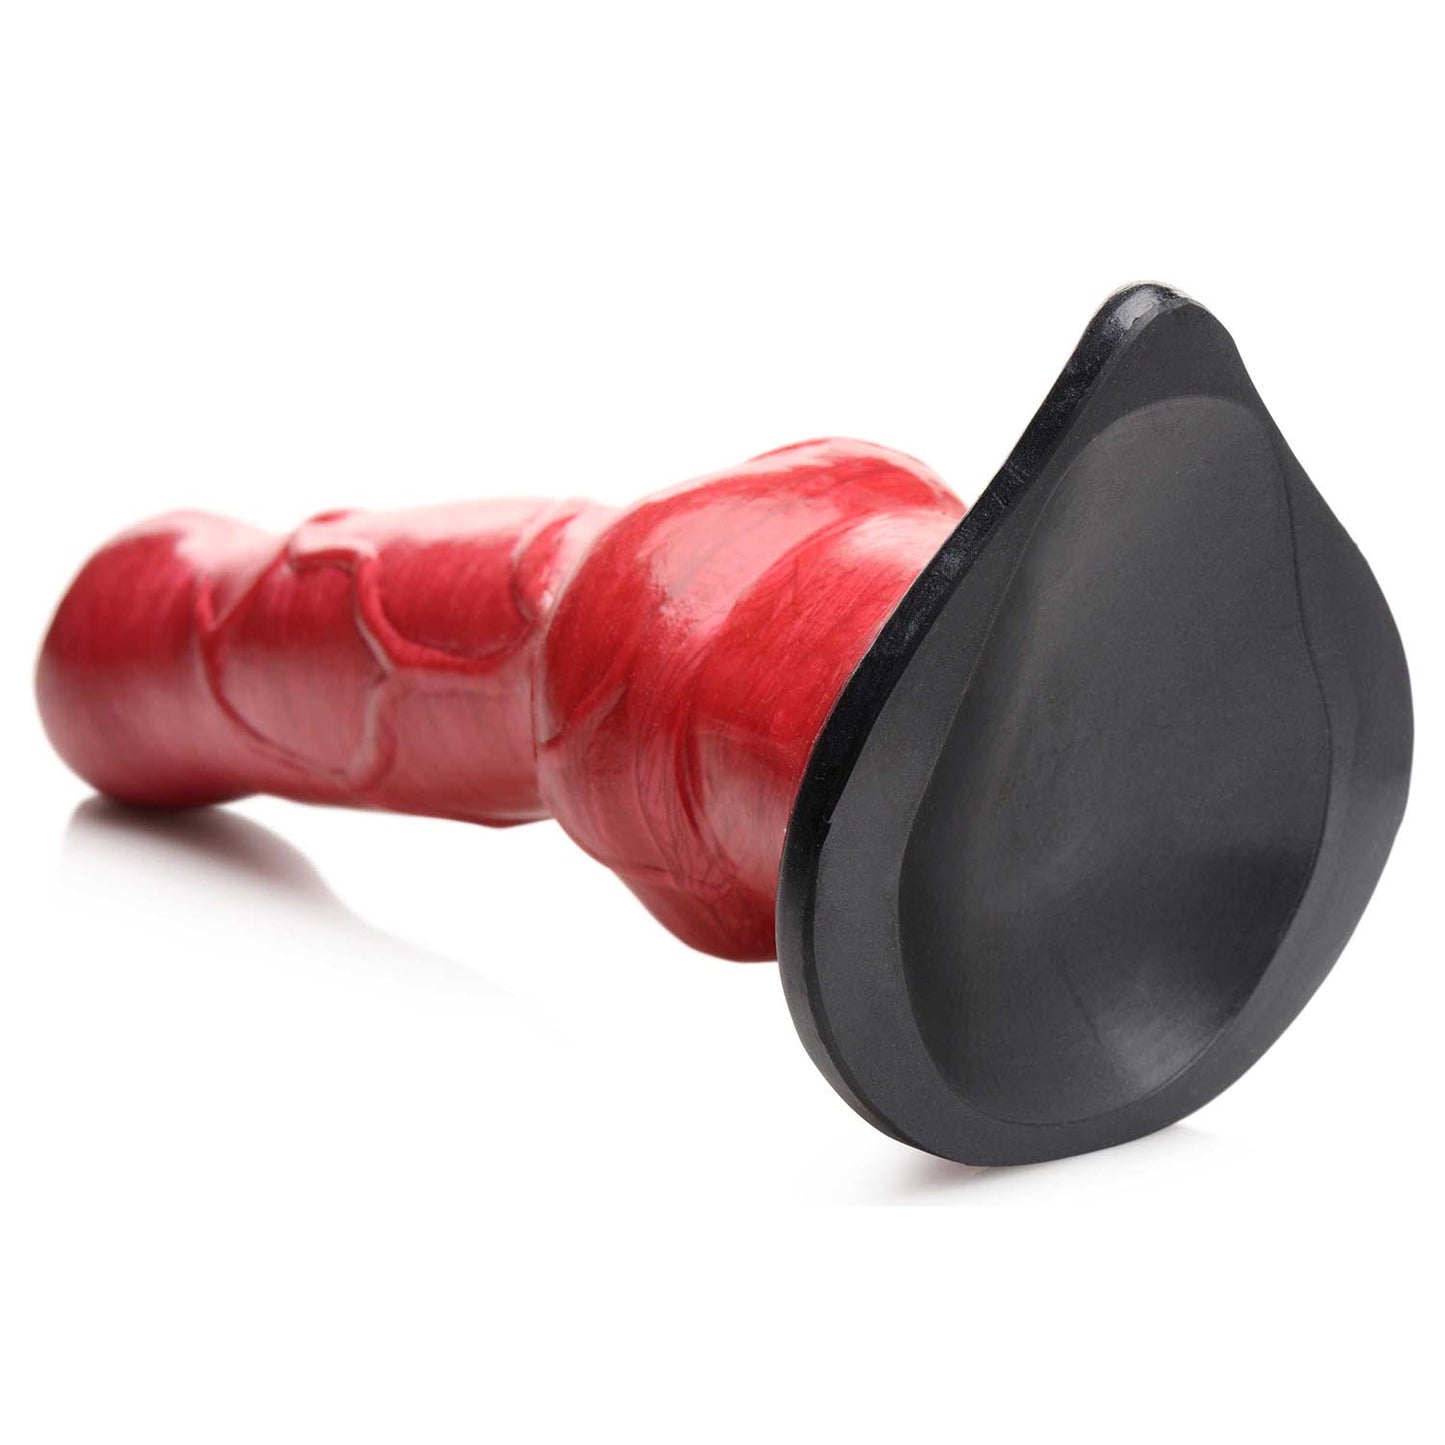 Hell-Hound Canine Penis Silicone Creature Dildo - Thorn & Feather